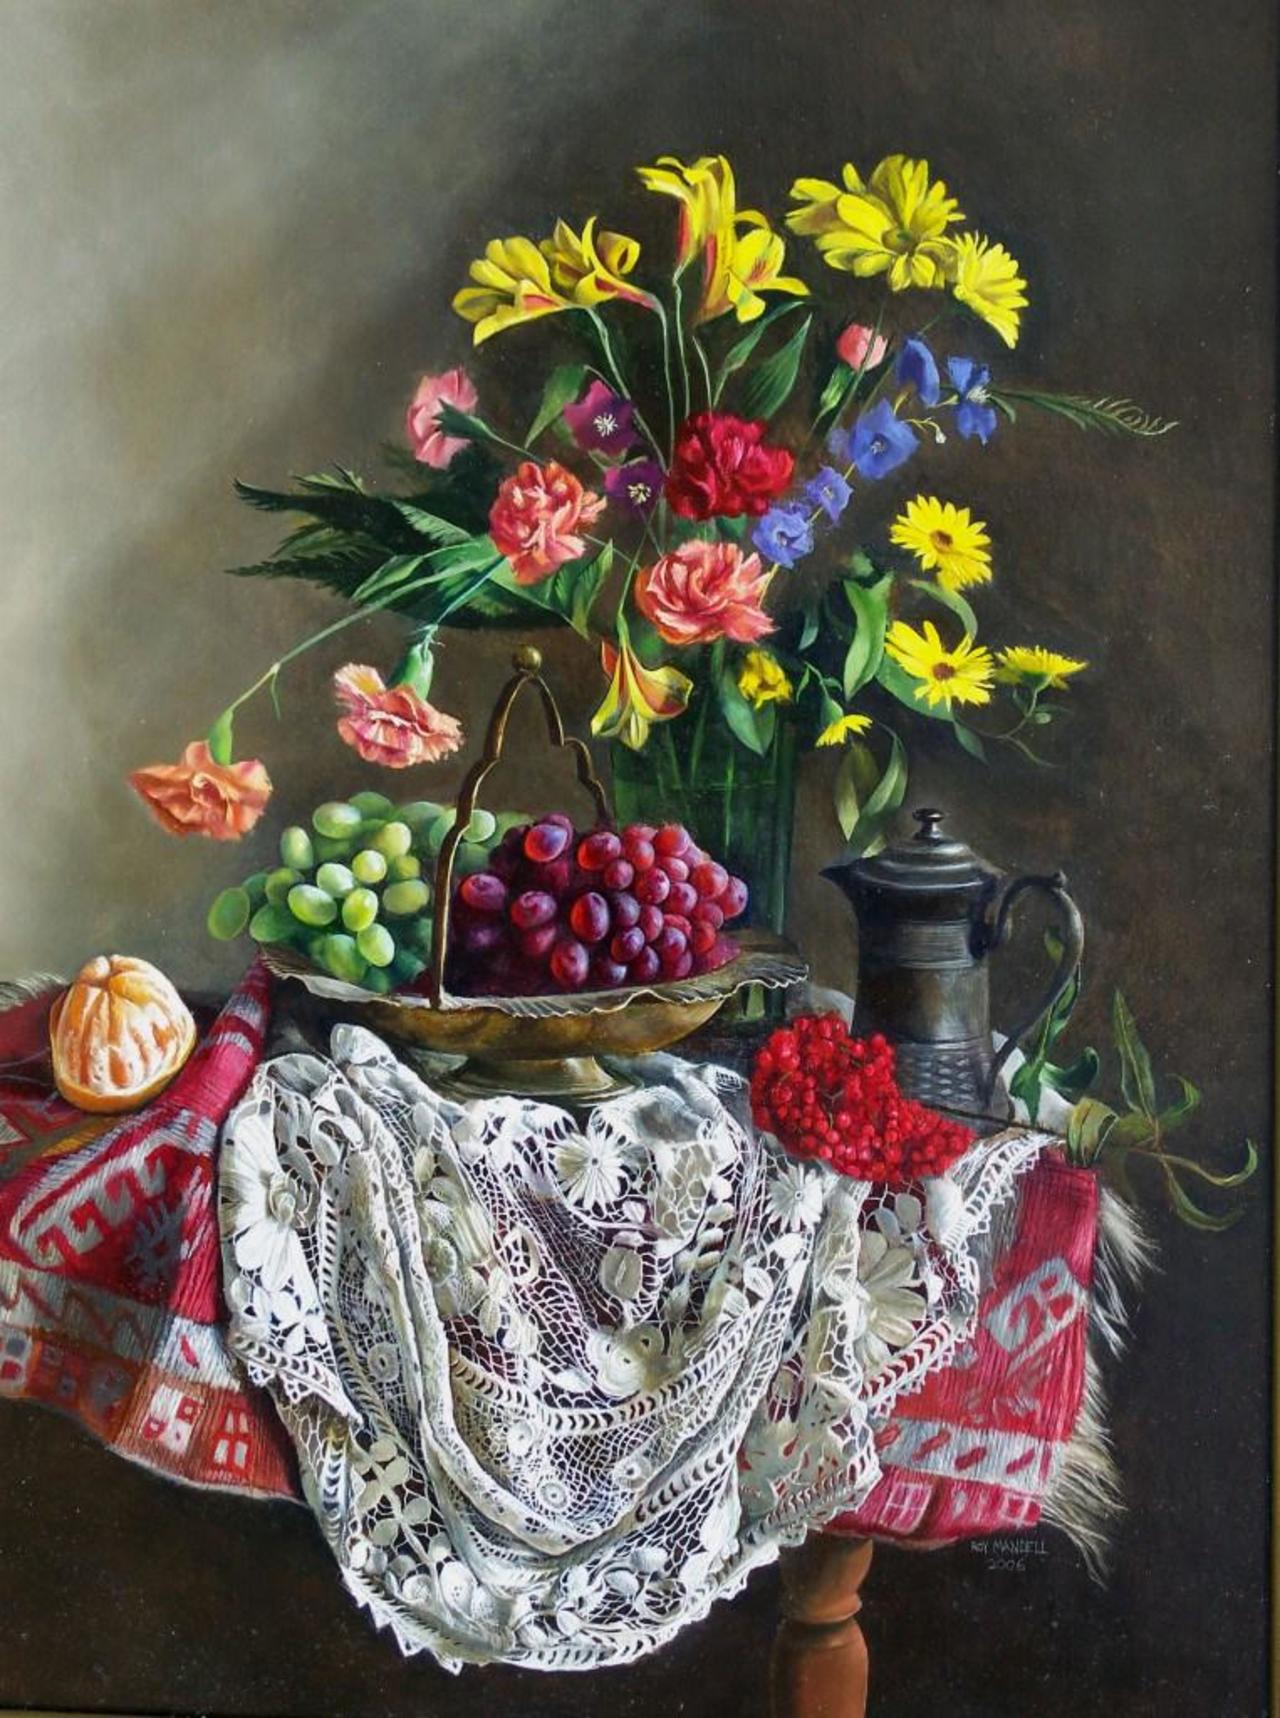 Keeping warm in the studio!  Here's a bright & warming still-life by Roy! #NovaScotia #StillLife #Yarmouth #art #Coop http://t.co/guOi6je8HJ